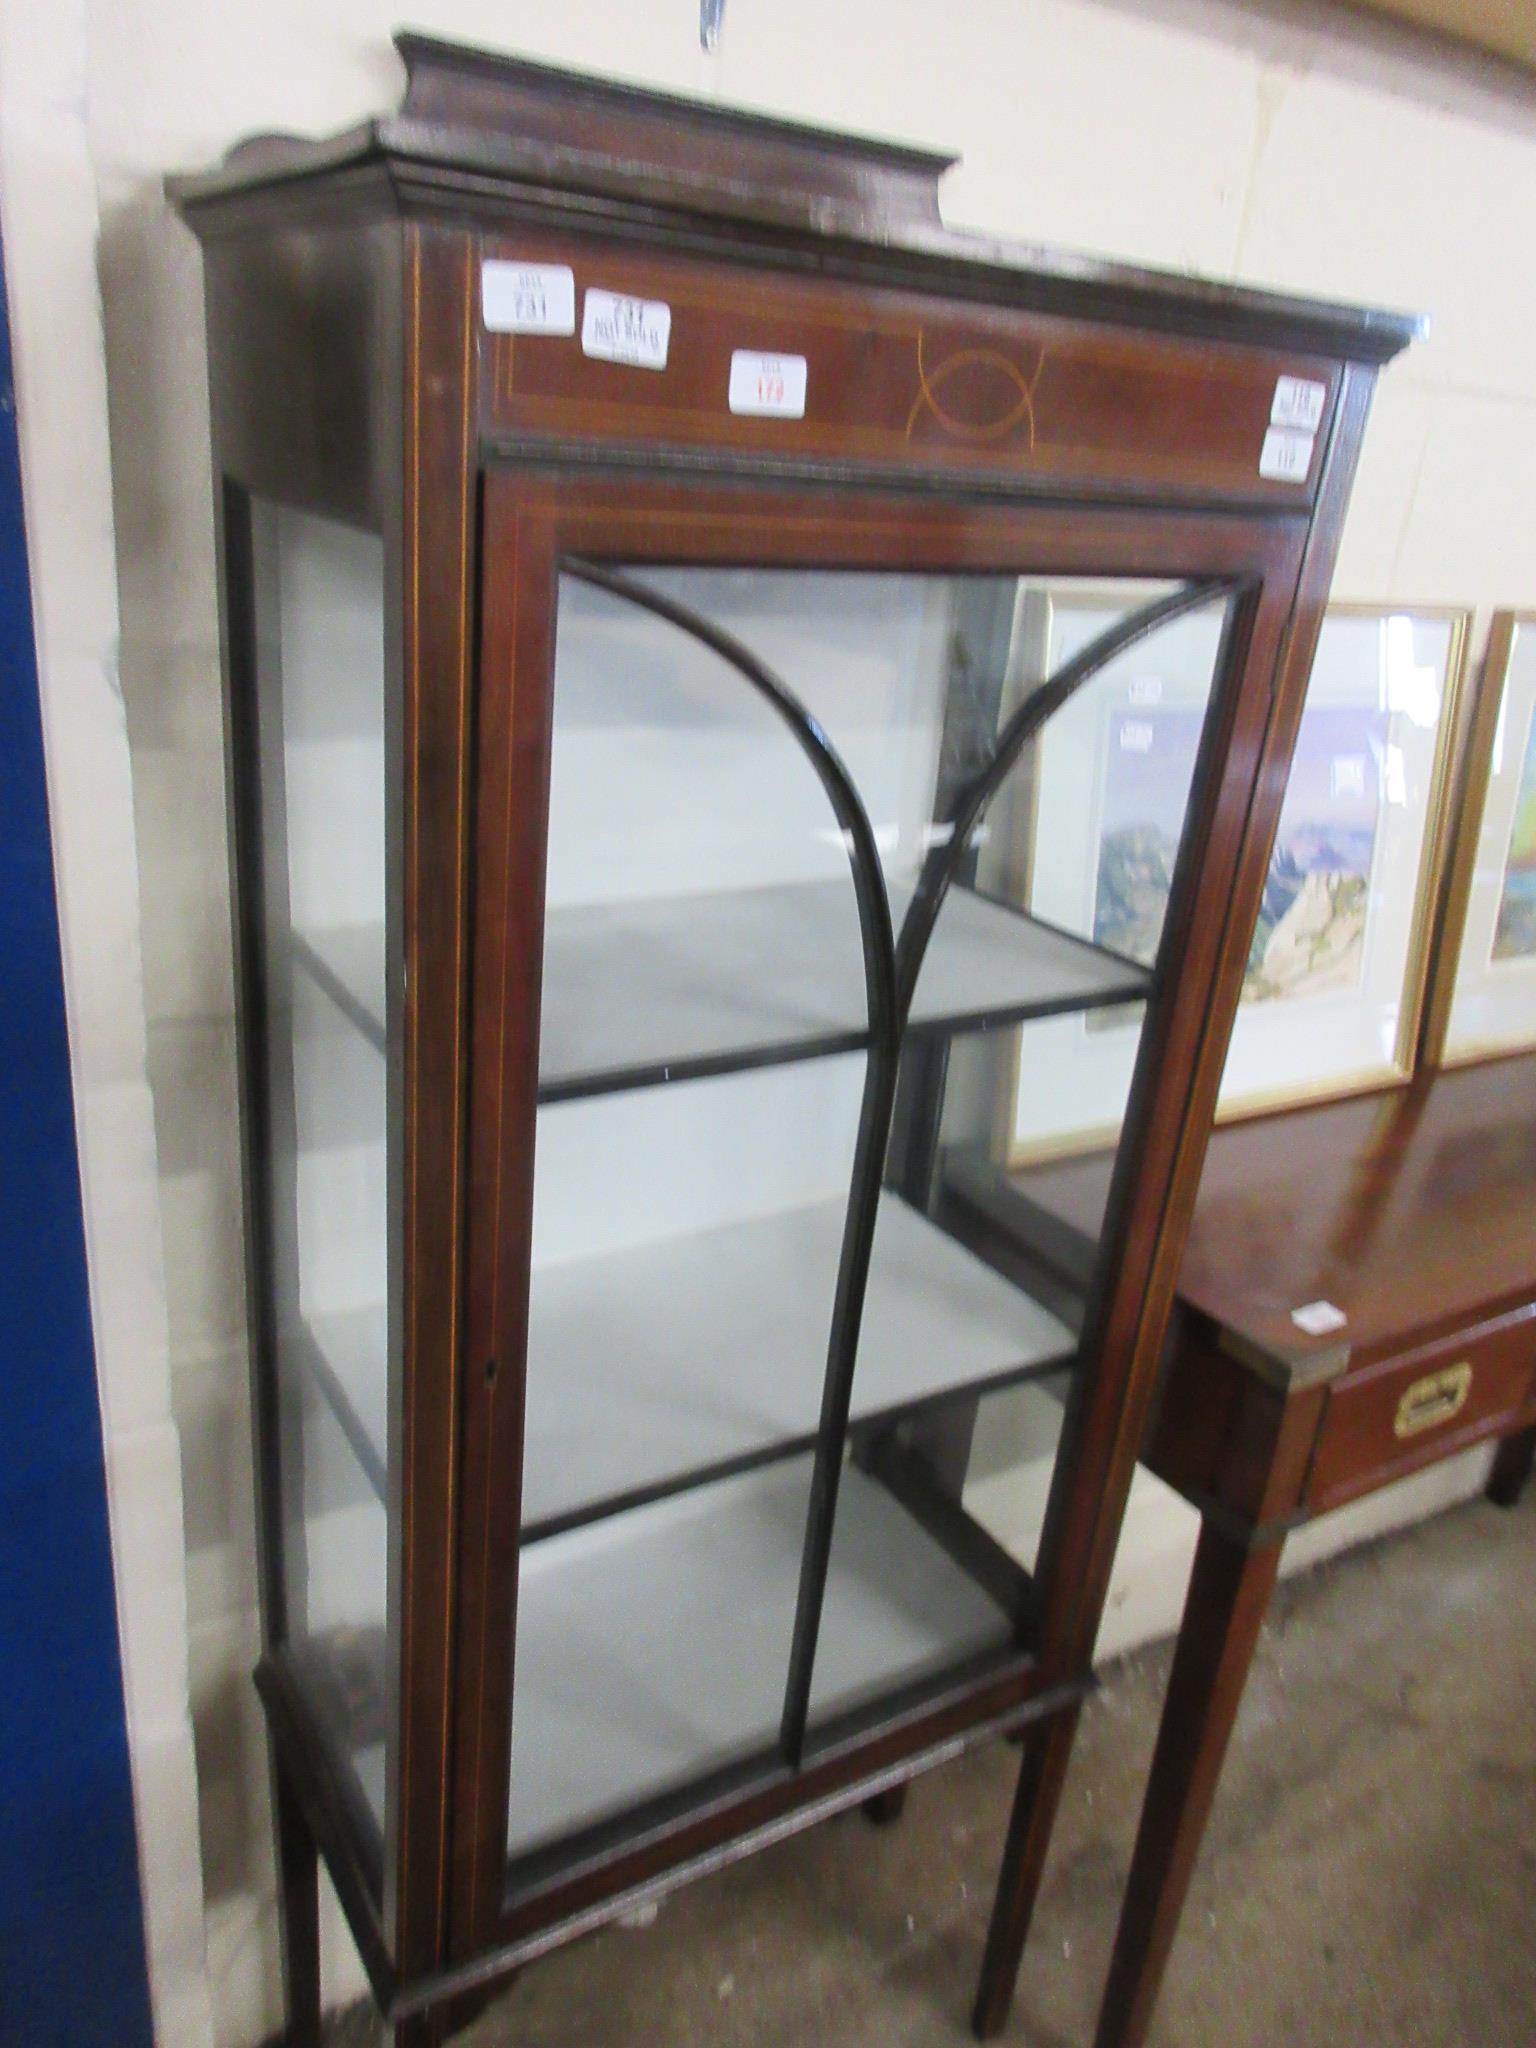 GOOD QUALITY EDWARDIAN CHINA CABINET WITH ASTRAGAL GLAZING AND STRUNG DECORATION THROUGHOUT, WIDTH